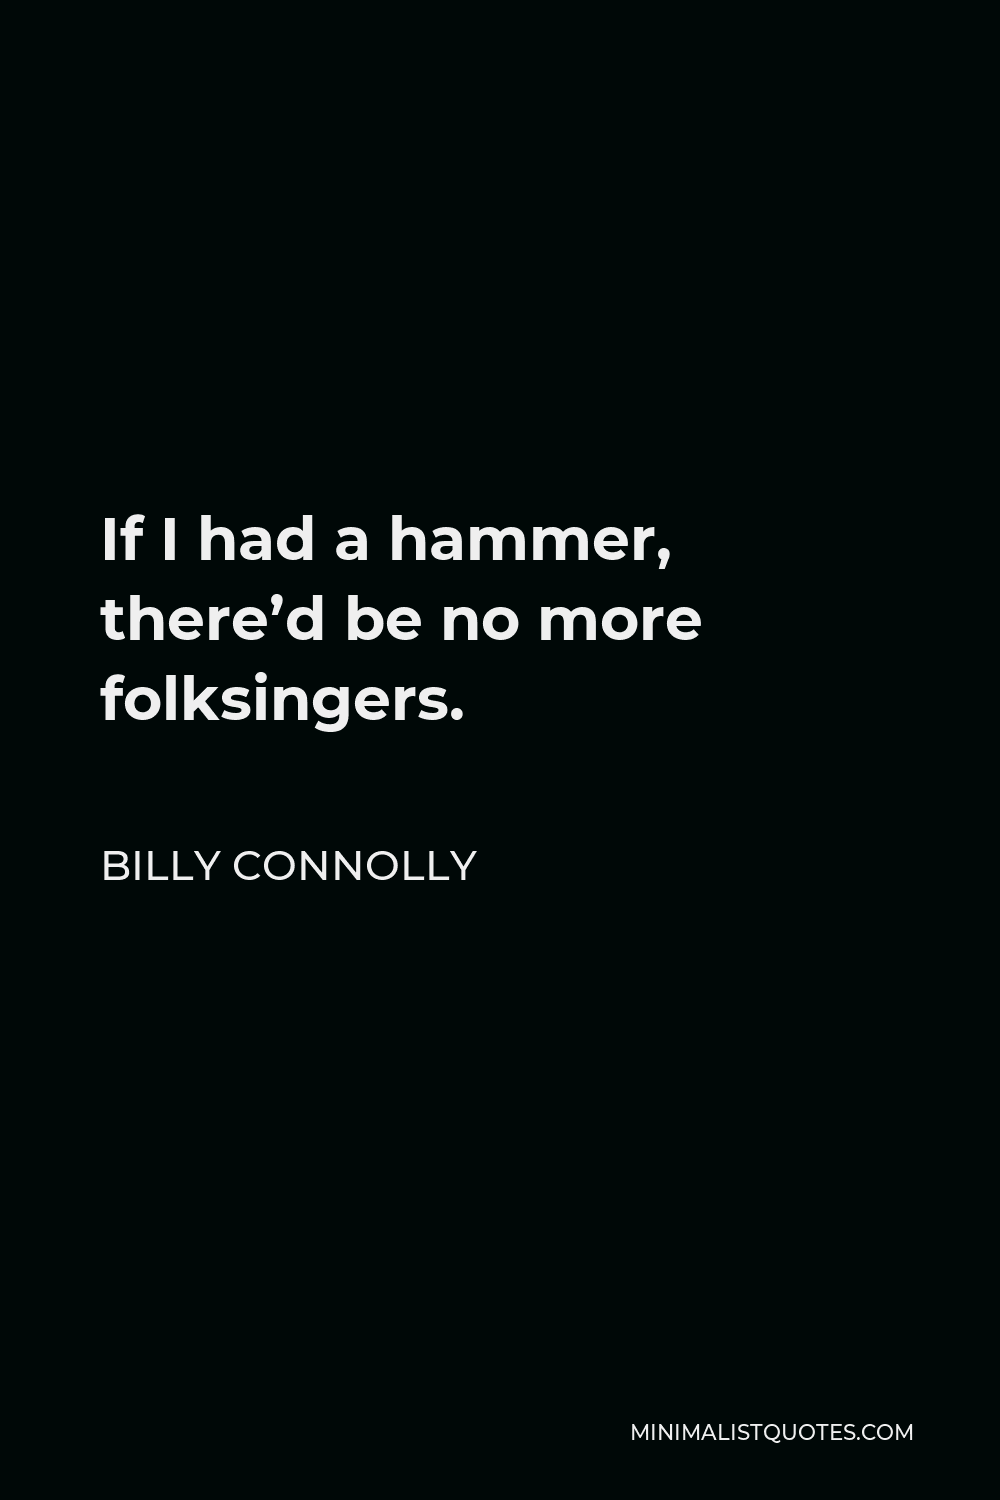 Billy Connolly Quote - If I had a hammer, there’d be no more folksingers.